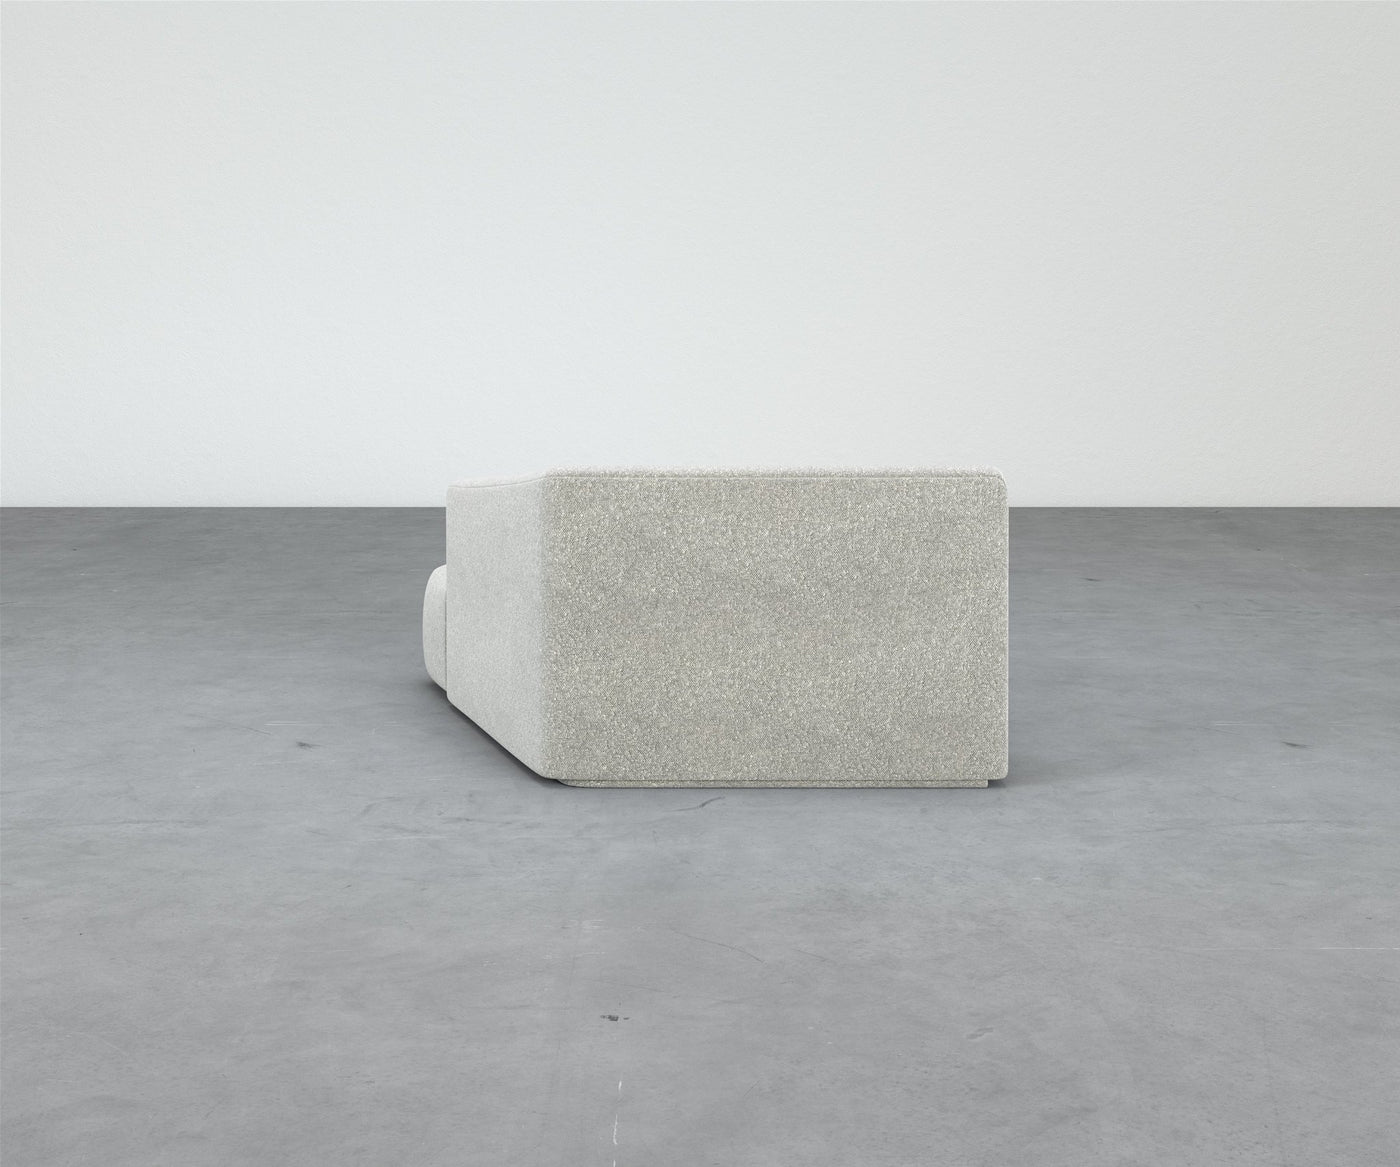 Formal Mallo Chaise - Modular Component #base_recessed-fabric-wrapped